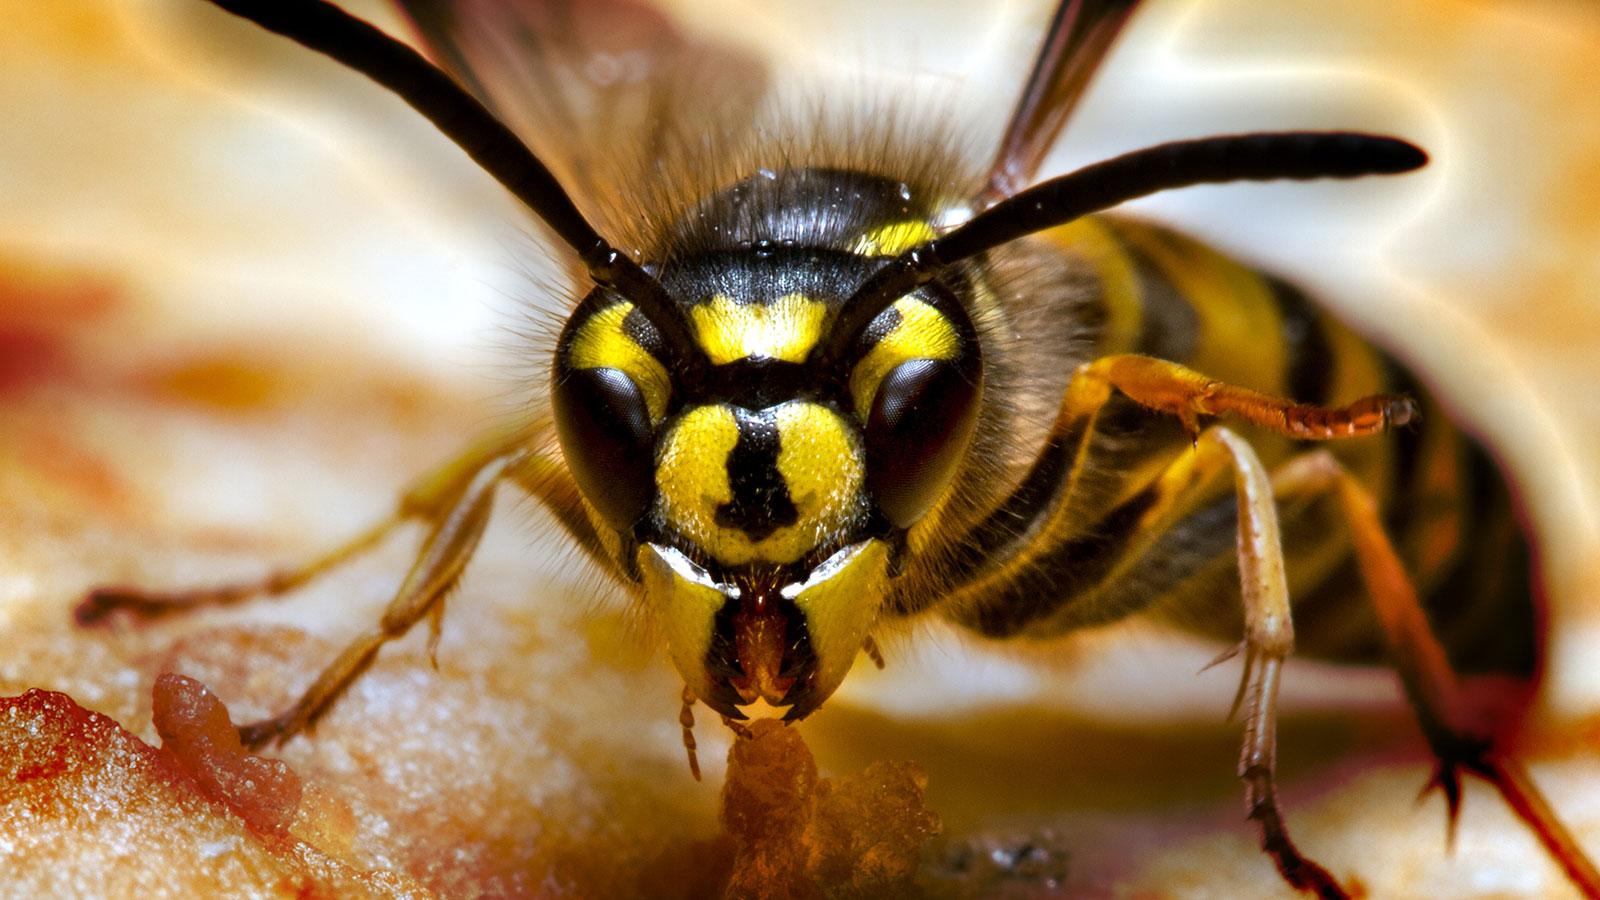 What's the Difference Between a Hornet and a Wasp